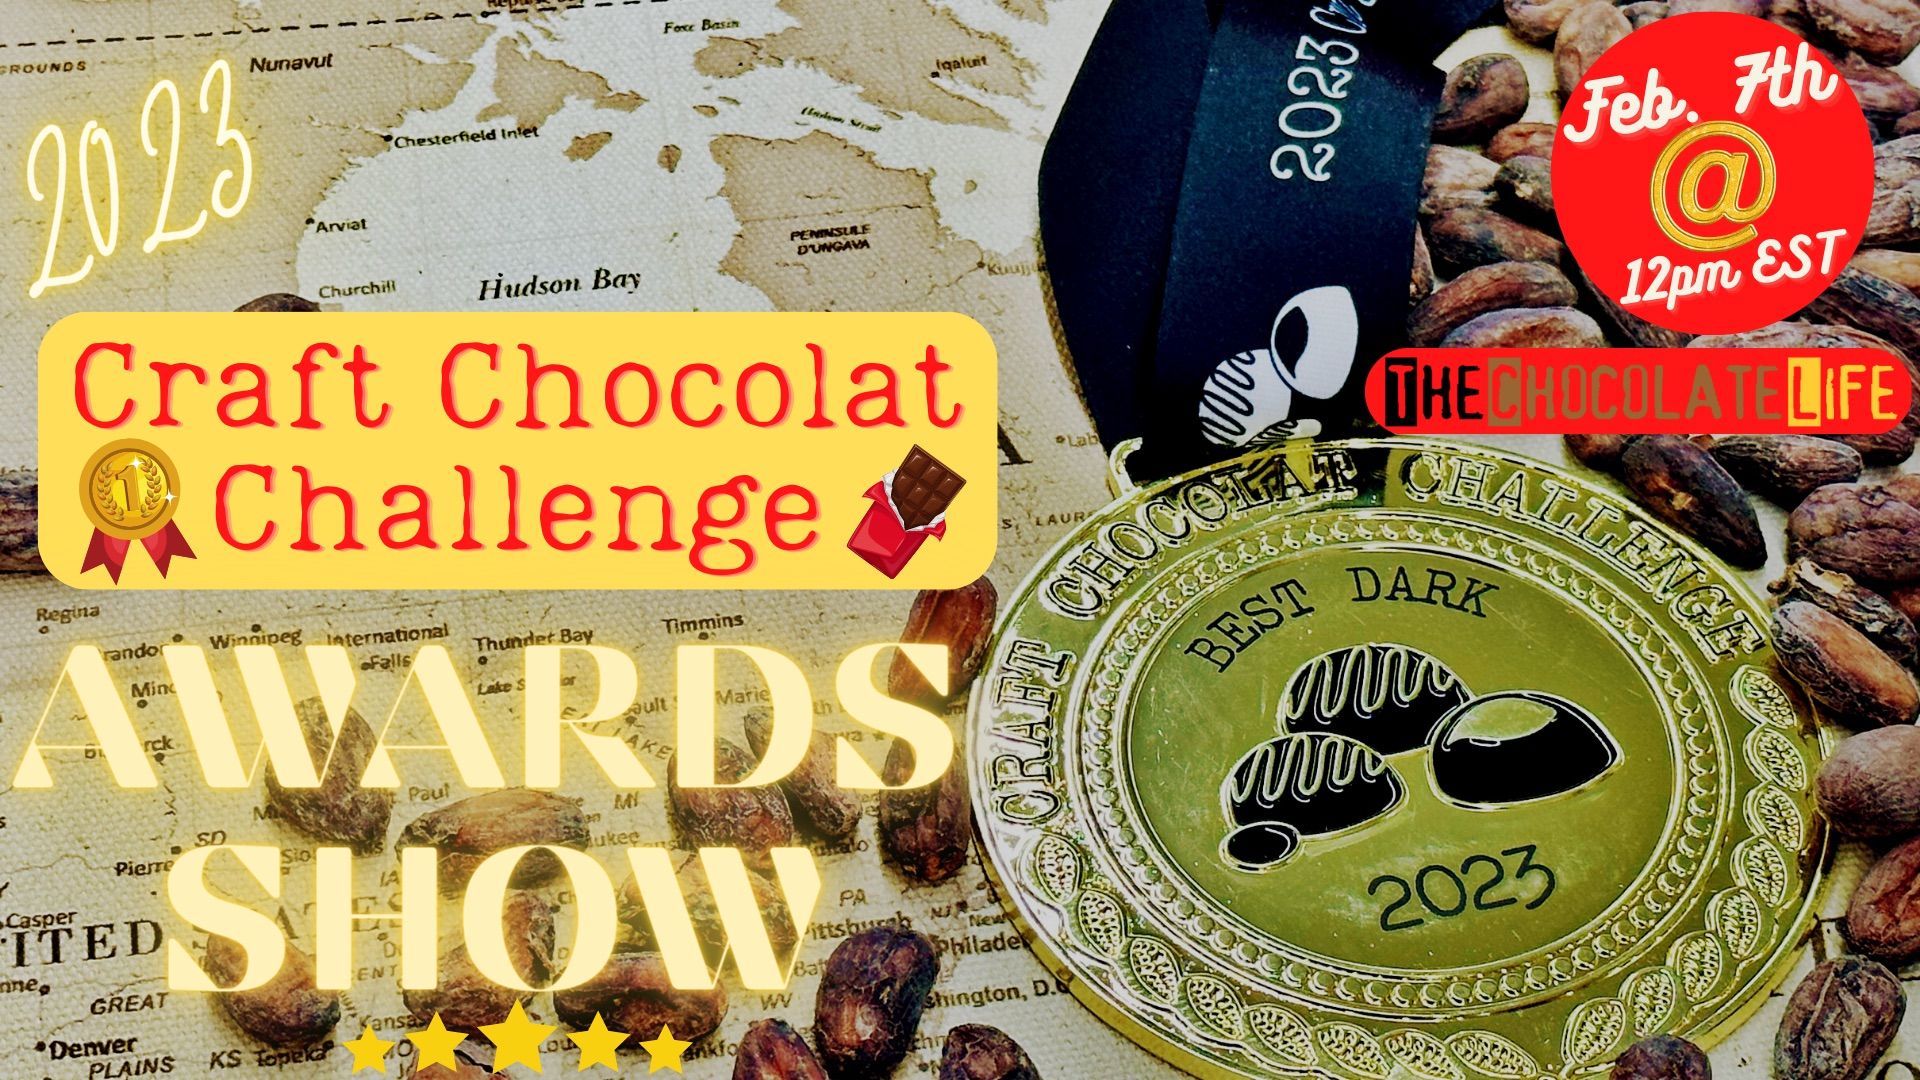 TheChocolateLifeLIVE – 2023 Craft Chocolat Challenge Results Show